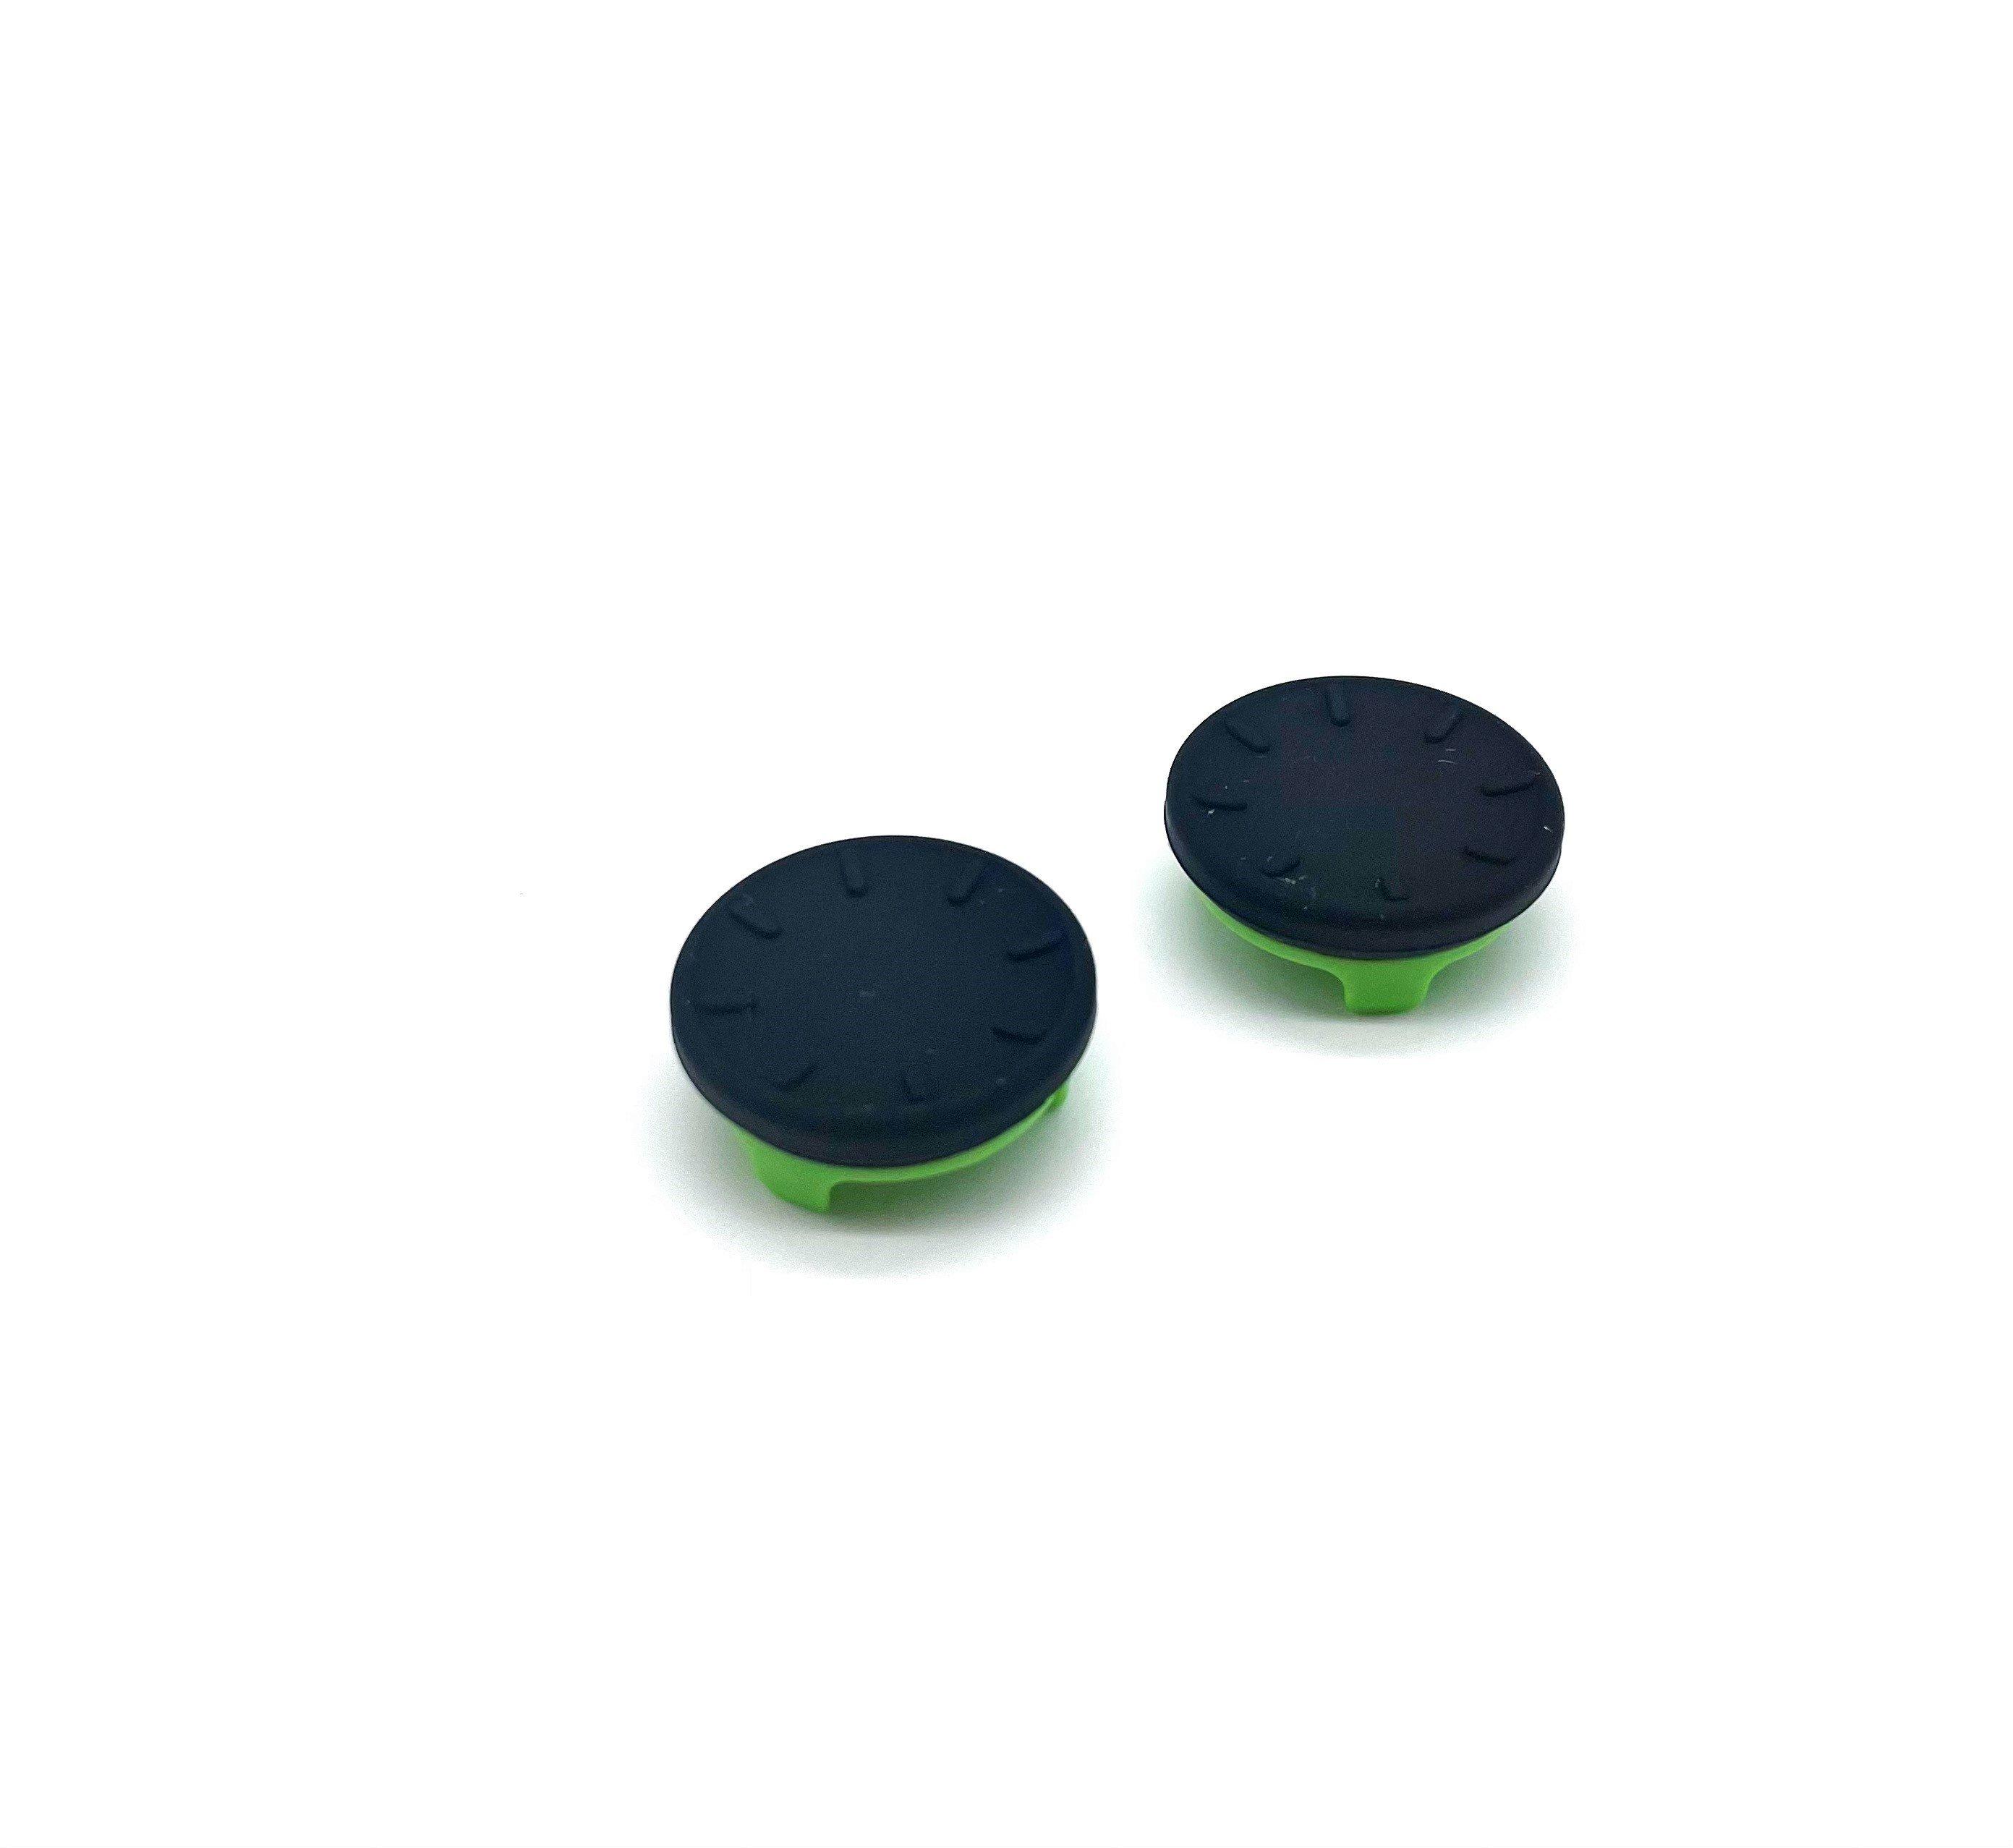 Atrix Short Thumb Grips for Xbox One and Series X/S GameStop Exclusive